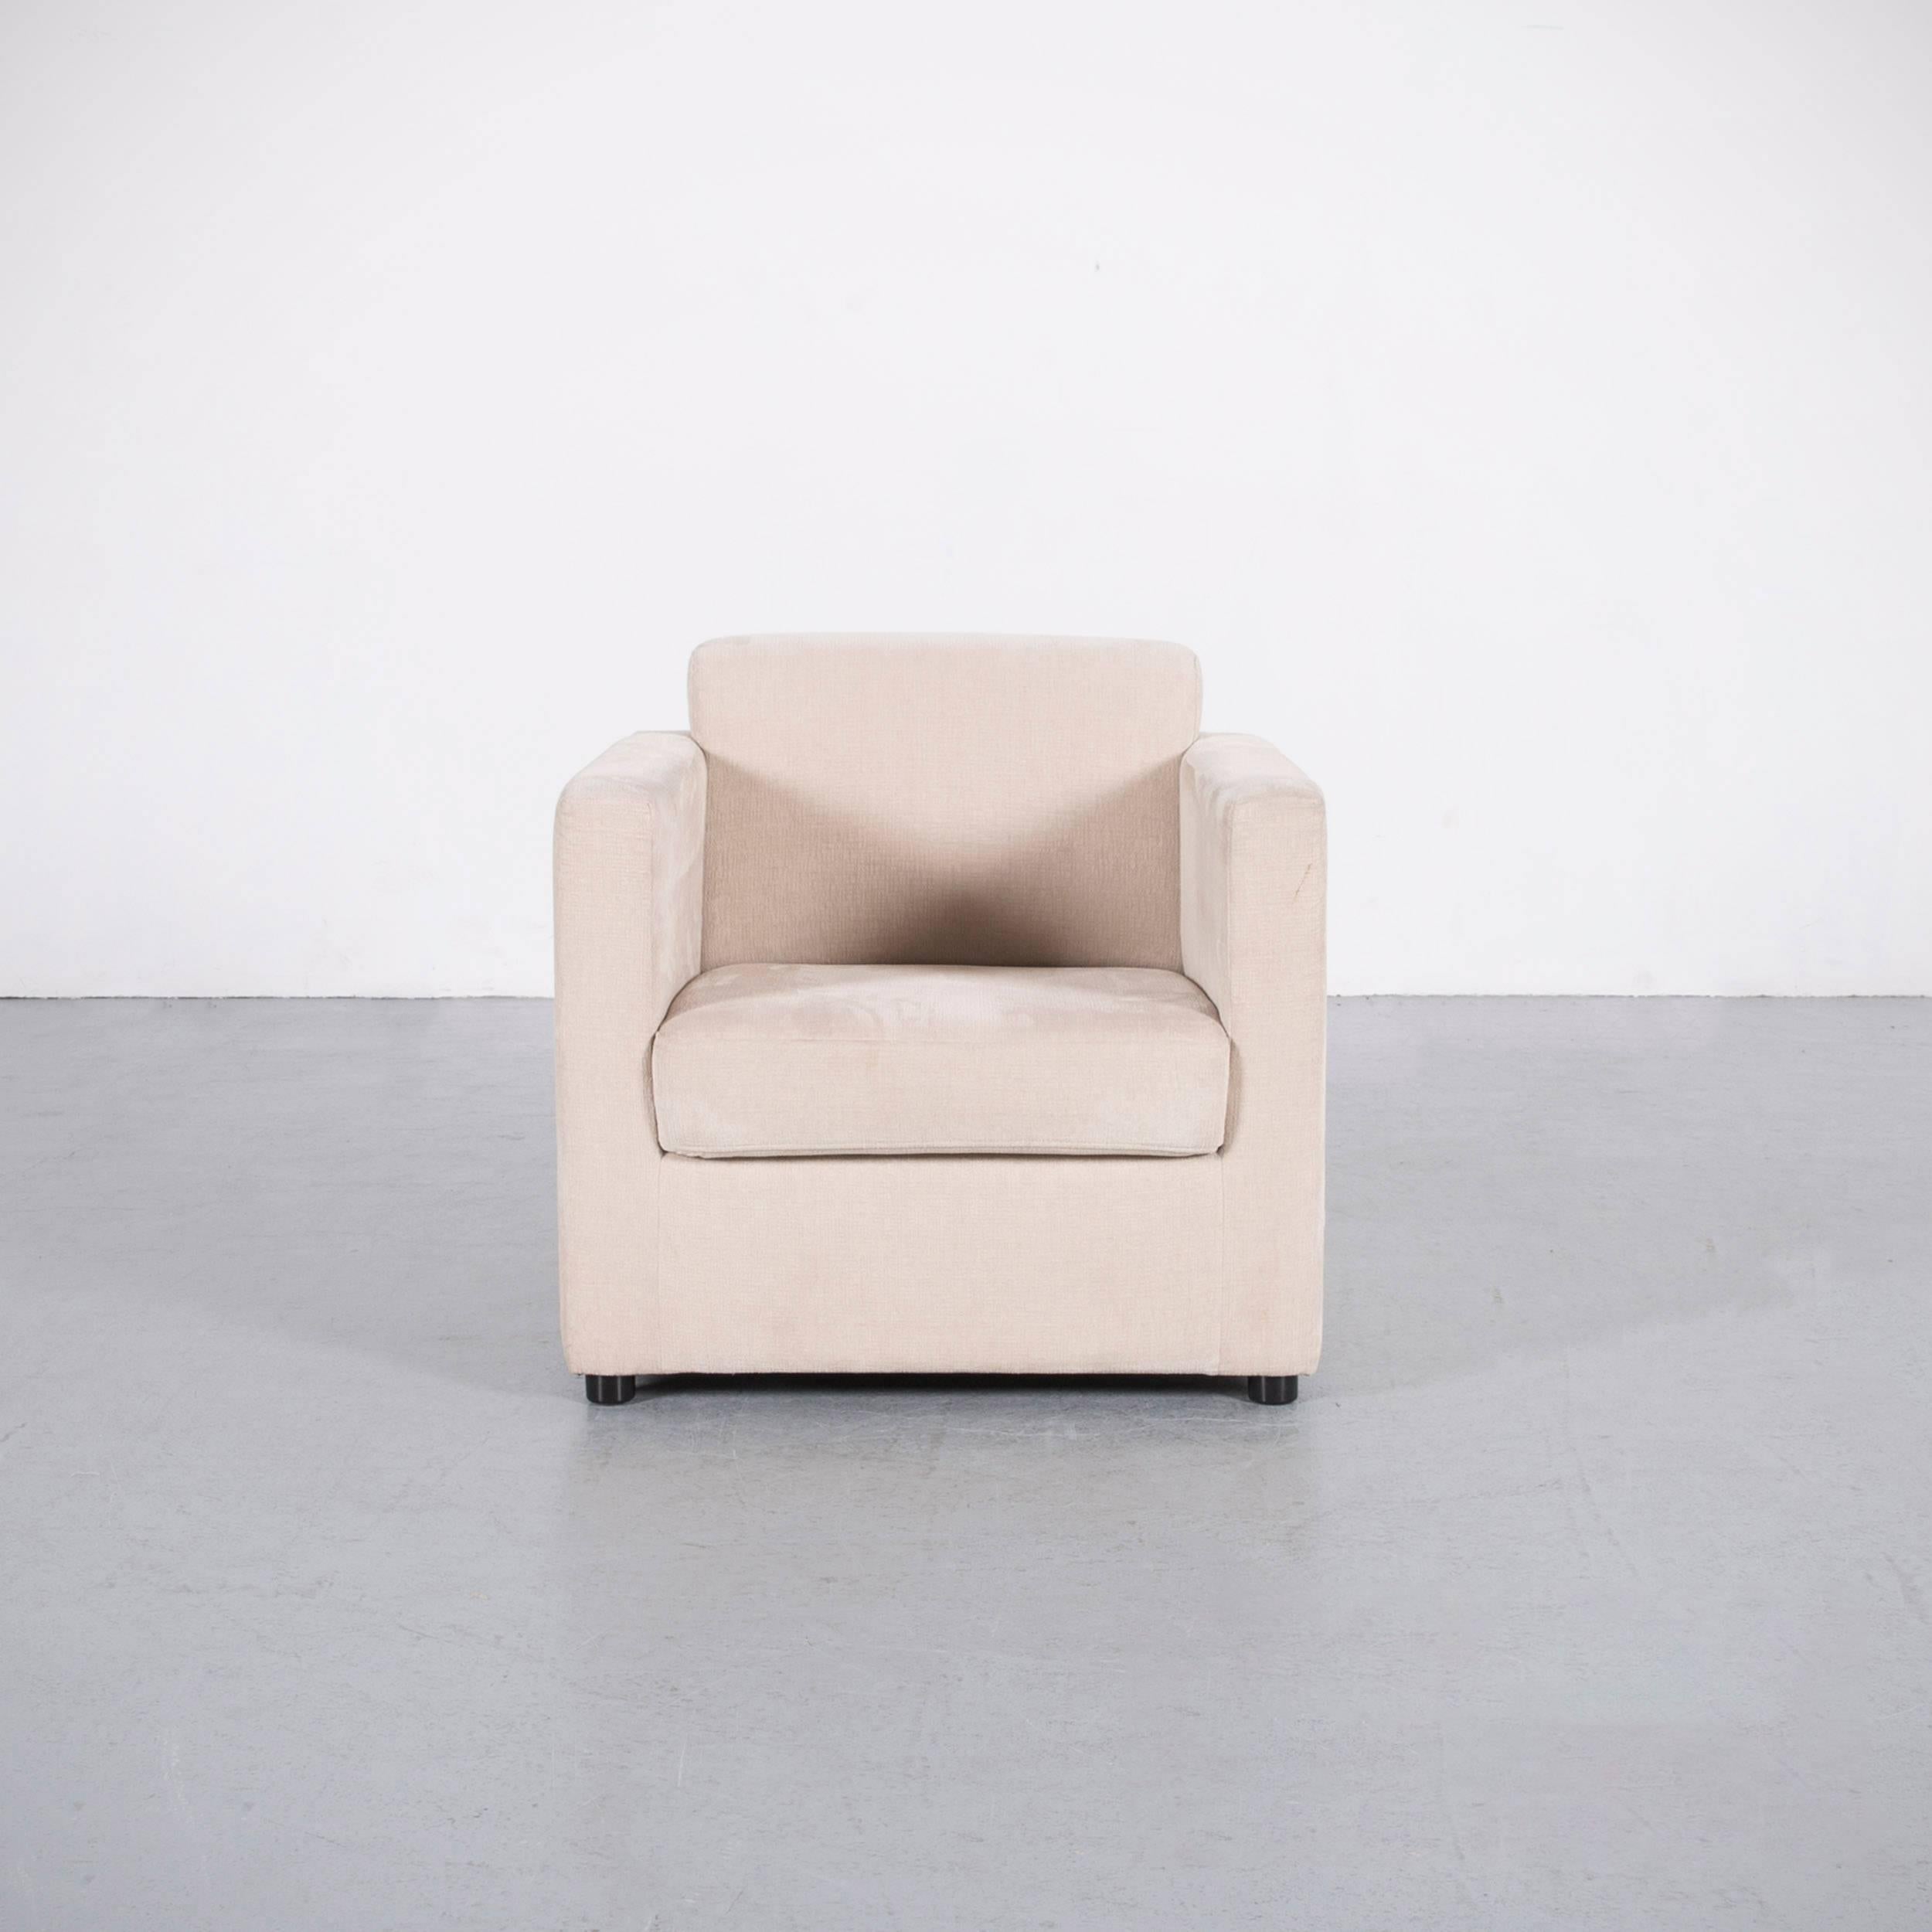 We bring to you an Ewald Schillig fabric armchair in off-white.











 